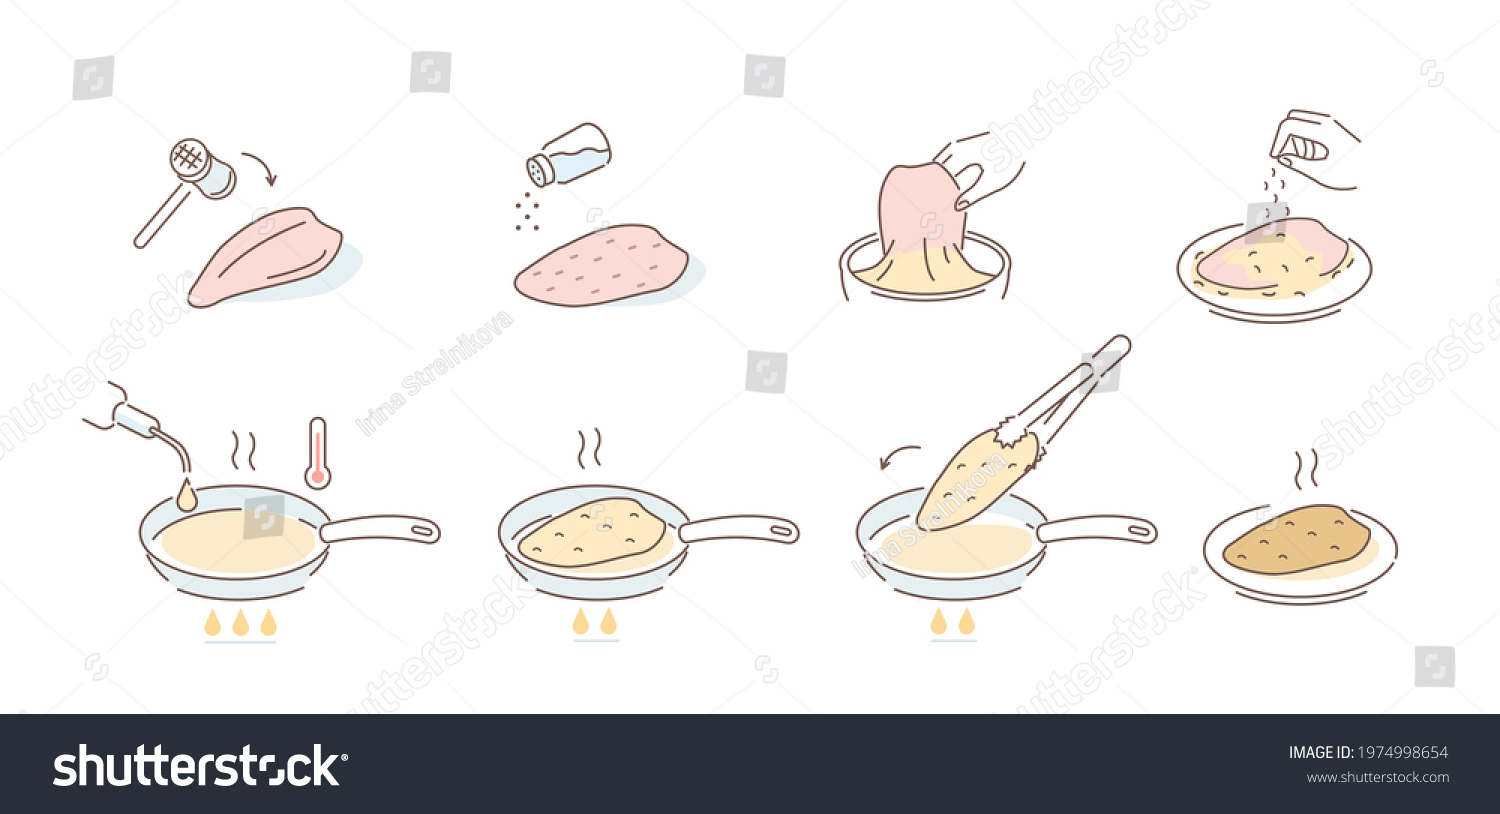 SVG of Instructions how to Prepare Chicken Schnitzel in Pan. Coat Meat with Egg and Breadcrumbs, Fry on both Sides and Serve. Cooking Guide. Flat Line Vector Illustration and Icons set. svg